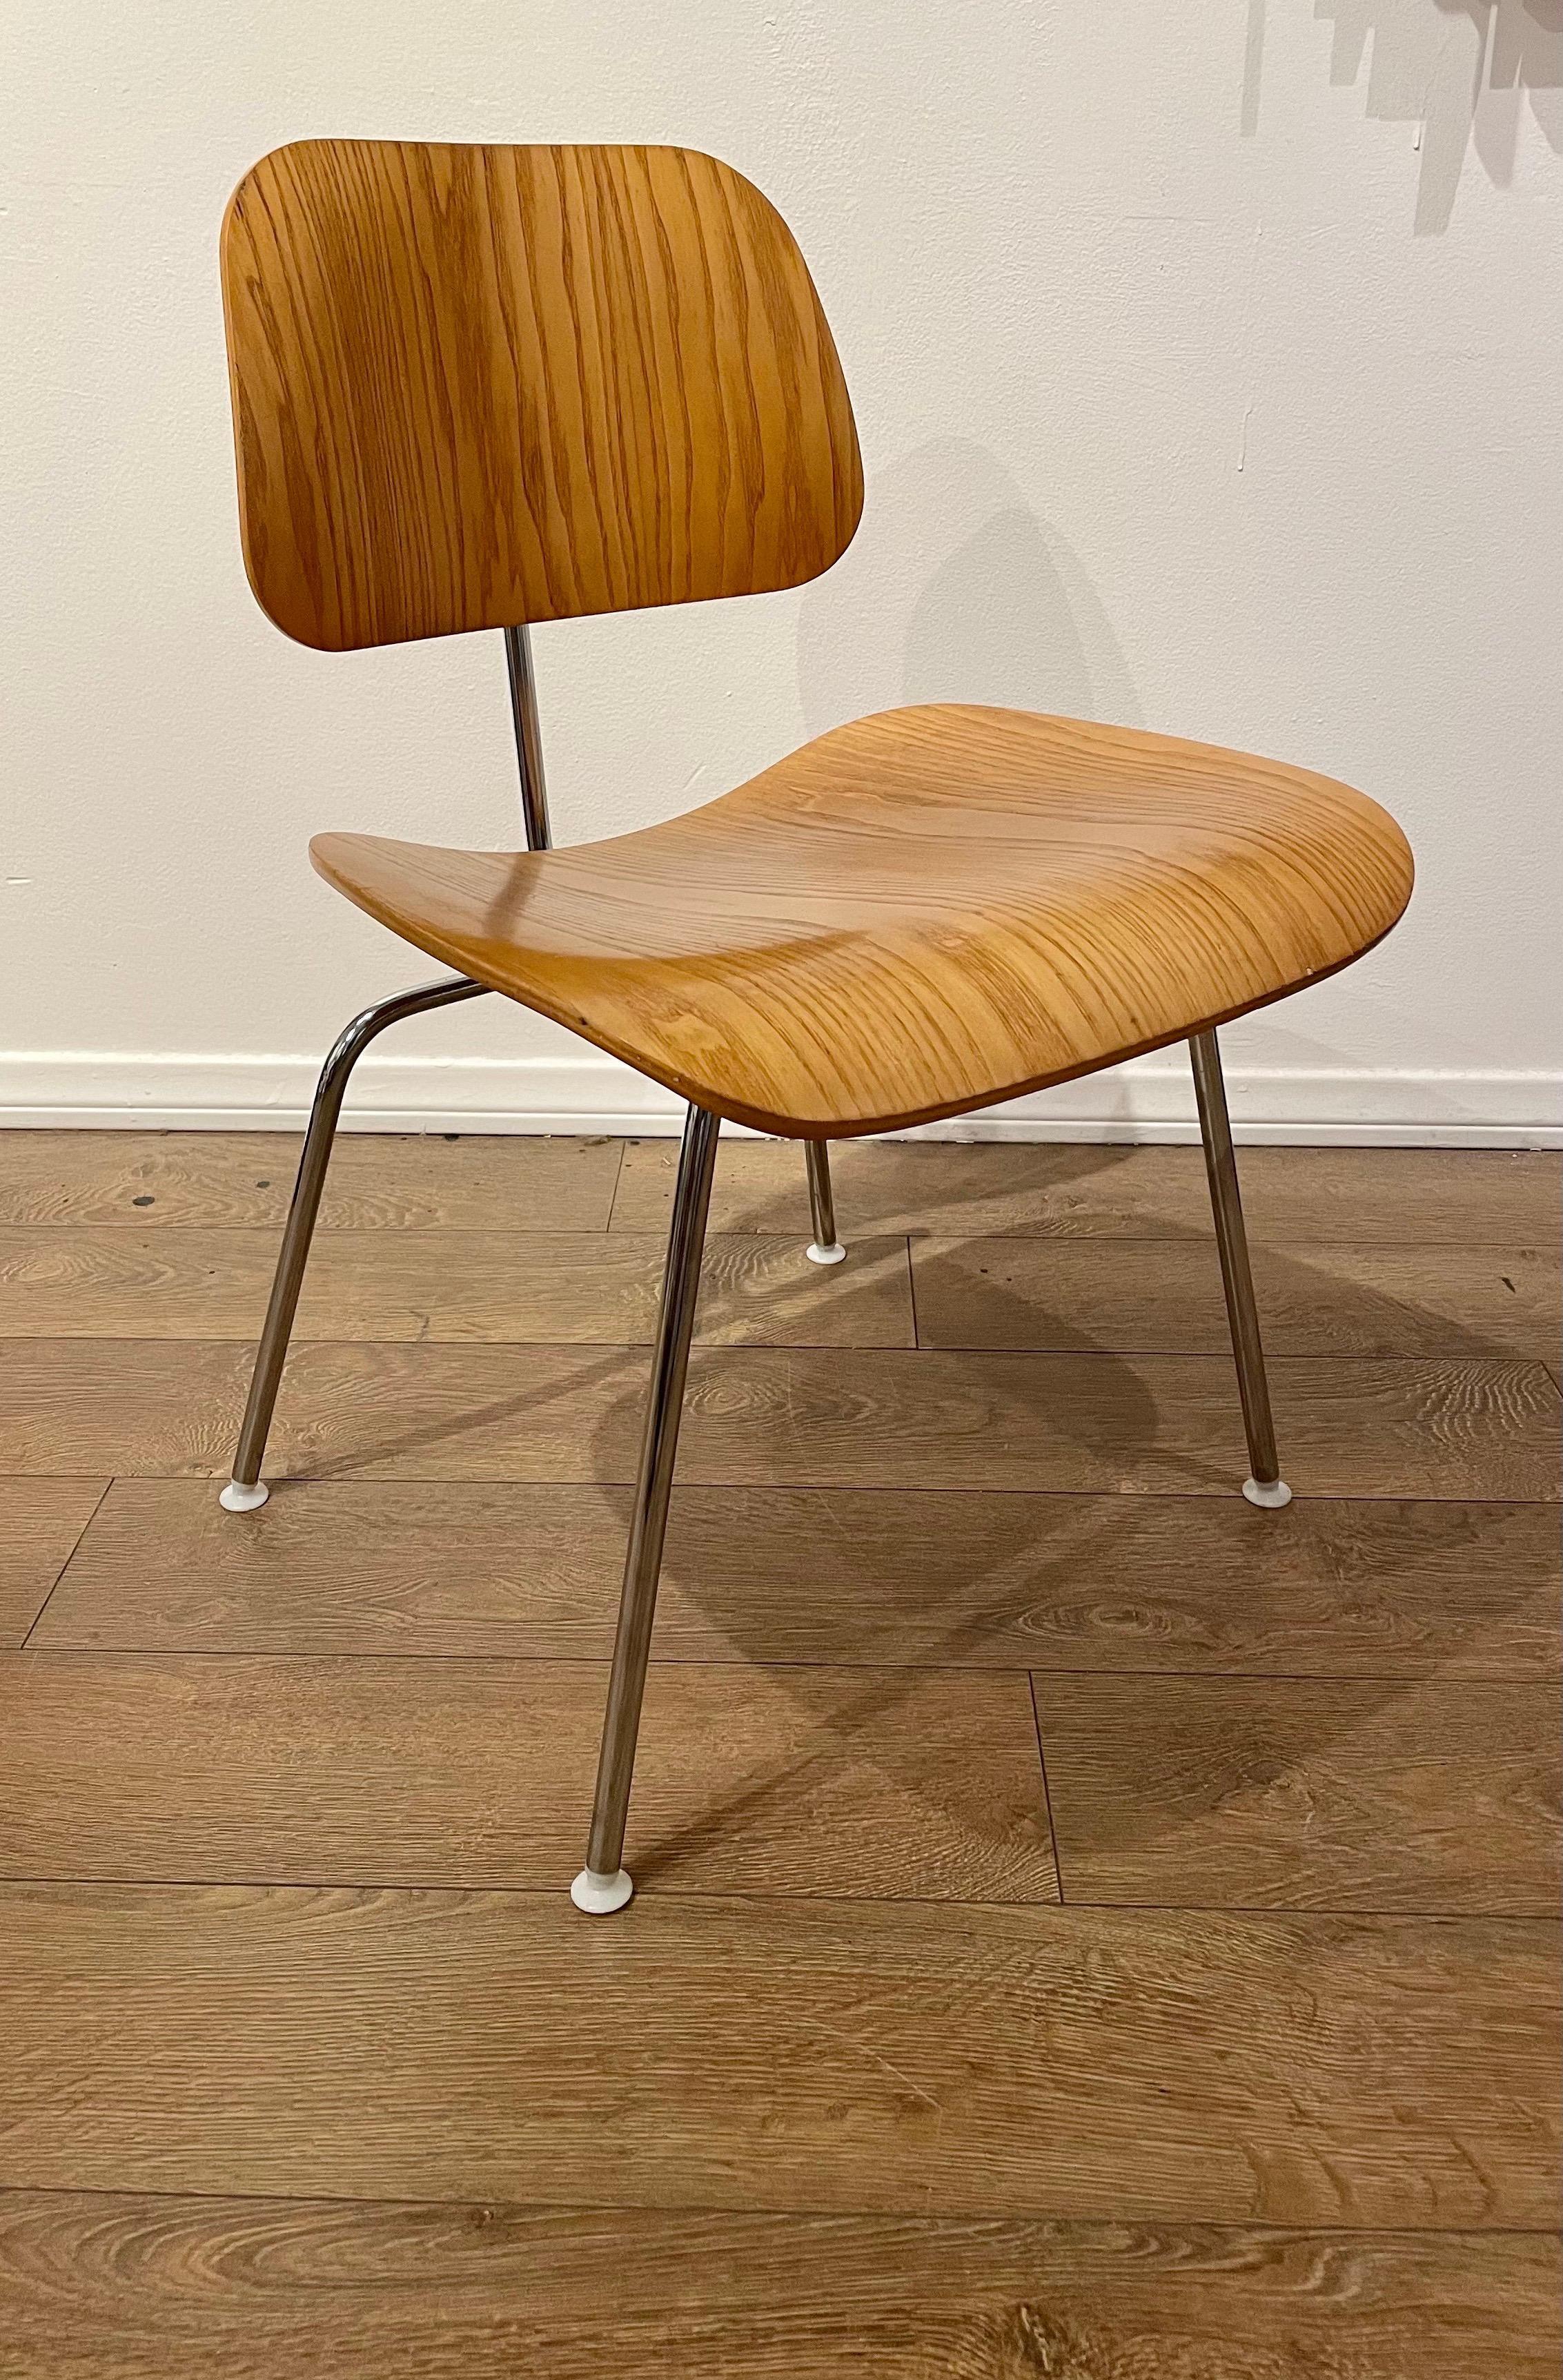 DCM chair designed by Eames for Herman Miller nice condition light wear in light walnut, with chrome base. Produced in 2006.